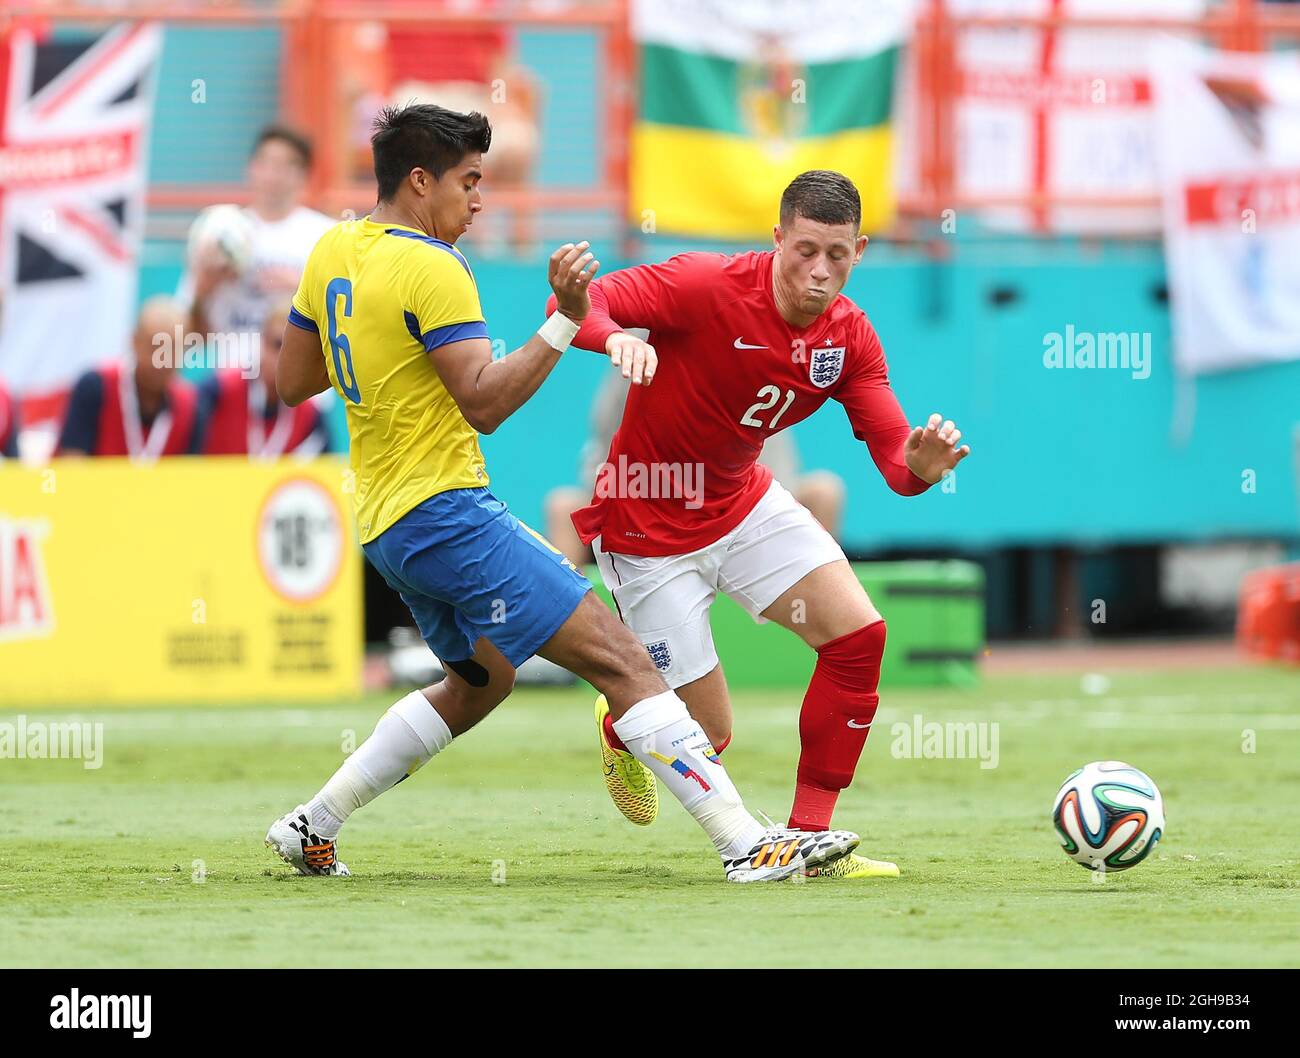 England's Ross Barkley tussles with Ecuador's Christian Noboa during the International Friendly match between England and Ecuador held at Sun Life Stadium in Miami, USA on June 4, 2014.Pic David Klein/Sportimage. Stock Photo